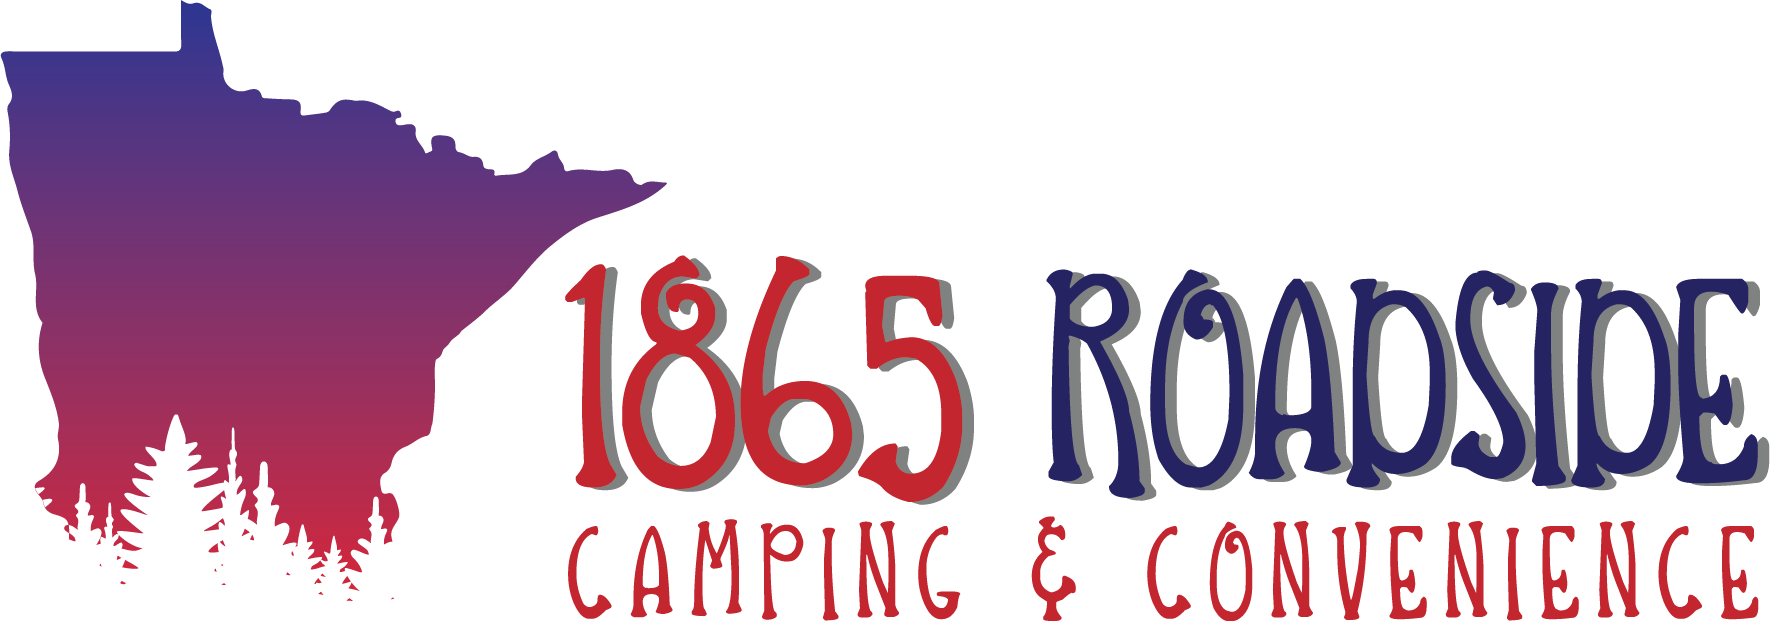 A green background with the words " 1 8 6 5 rodeos camping & catering ".